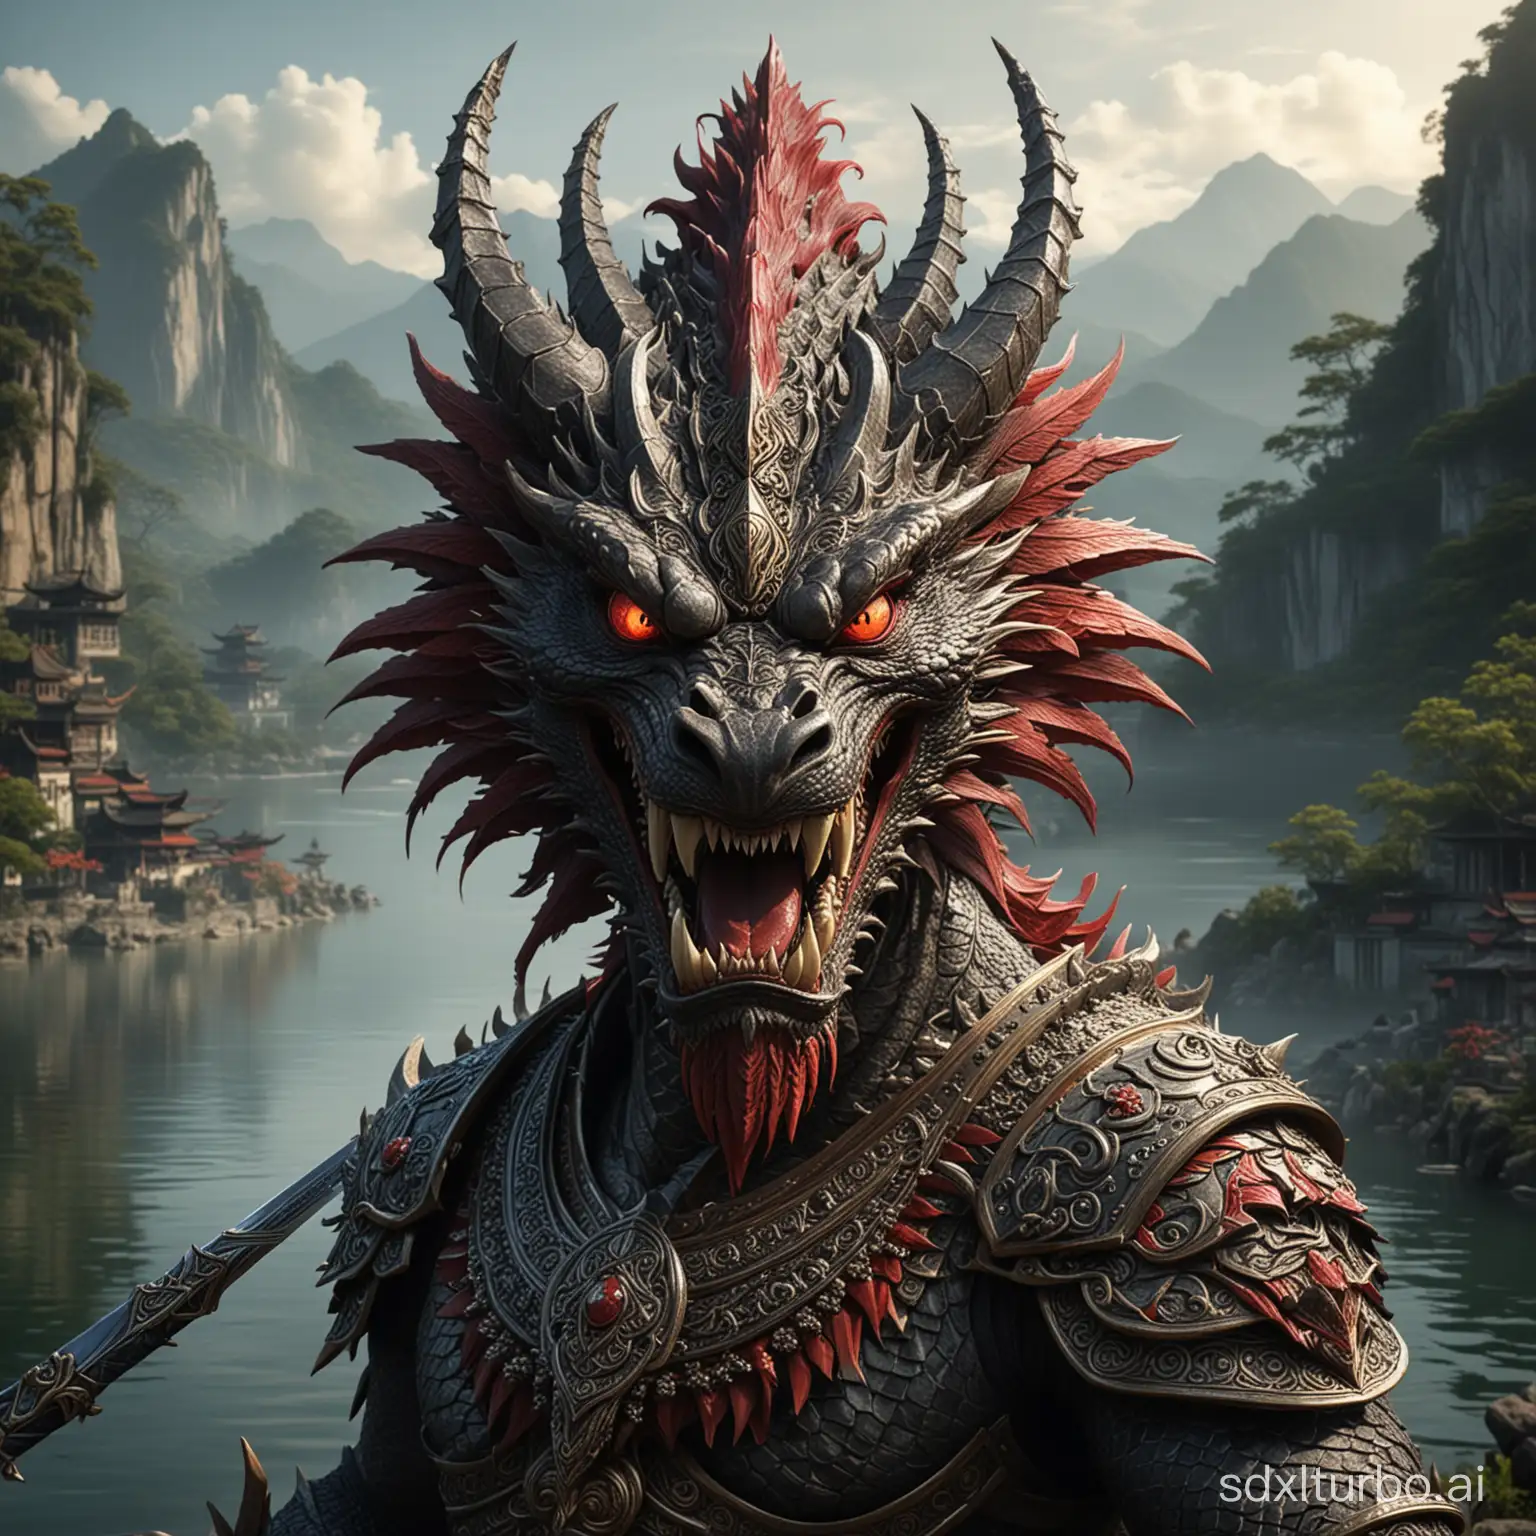 a Javanese Indonesian mythological creature that looks like a combination of a dragon and a god. The ornamental details are very complicated and artistic. This creature has a scary face with sharp eyes, long fangs, and a bright red tongue. He holds a large sword with elaborate decorations.
Scary face: Sharp eyes, long fangs, and a red tongue.
Greatsword: Decorated with elaborate ornaments.
Ornate body: Artistic and complex.
Dragon element: The dragon head is visible on the left side of the image.
Background: Natural landscape with calm water and blurred mountains in the distance.
Dark and dramatic atmosphere,
creates a mystical aura